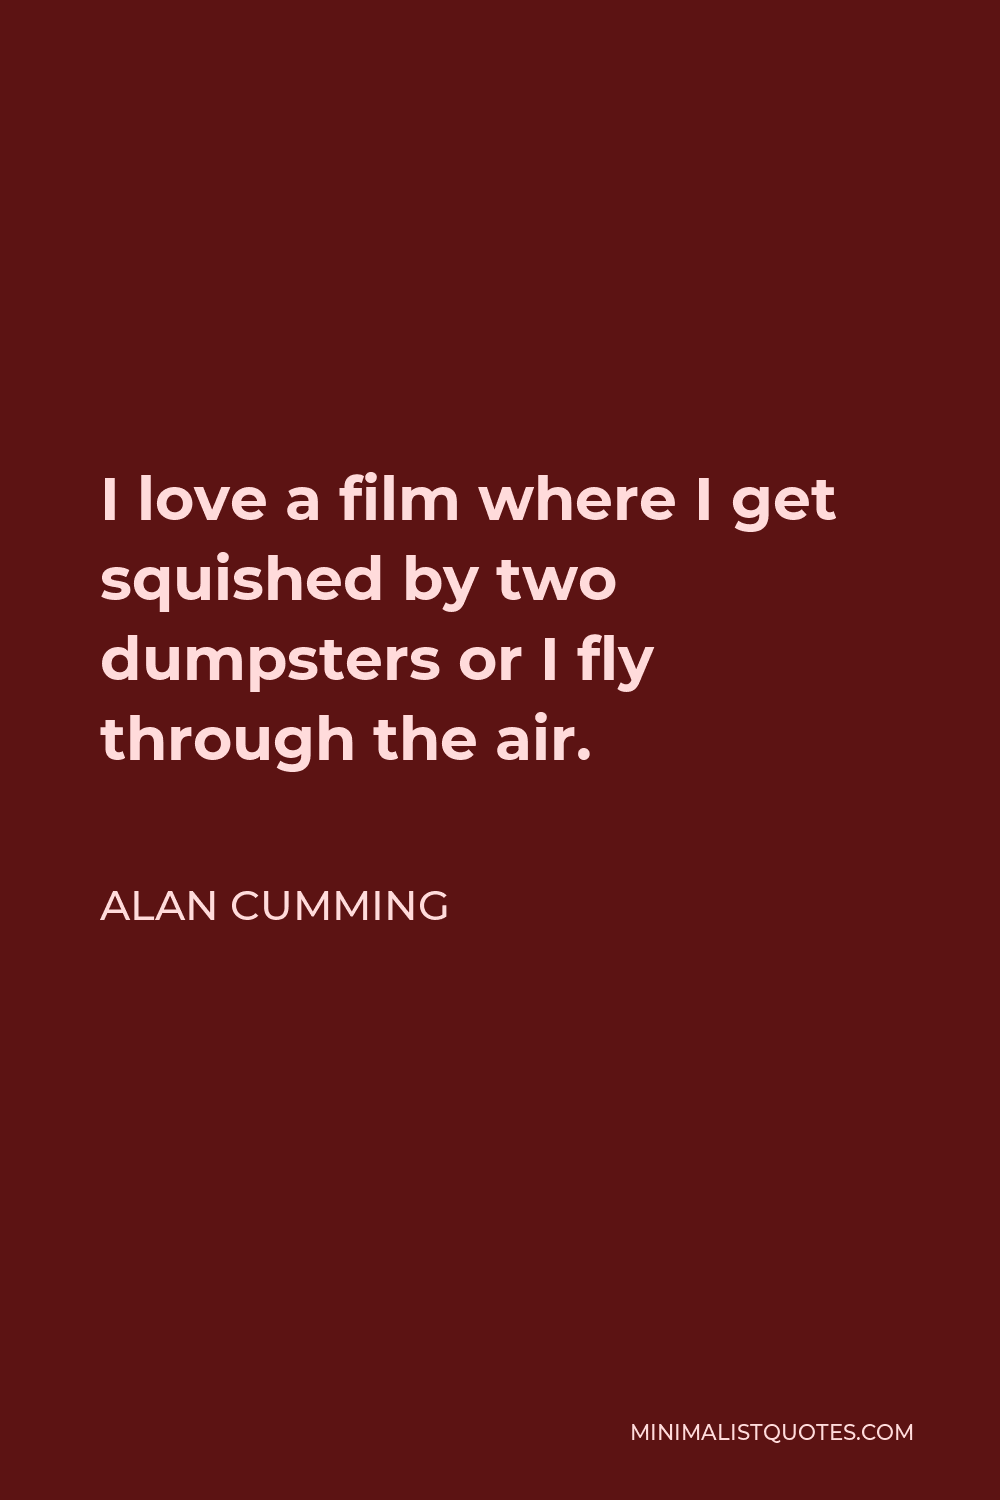 Alan Cumming Quote - I love a film where I get squished by two dumpsters or I fly through the air.